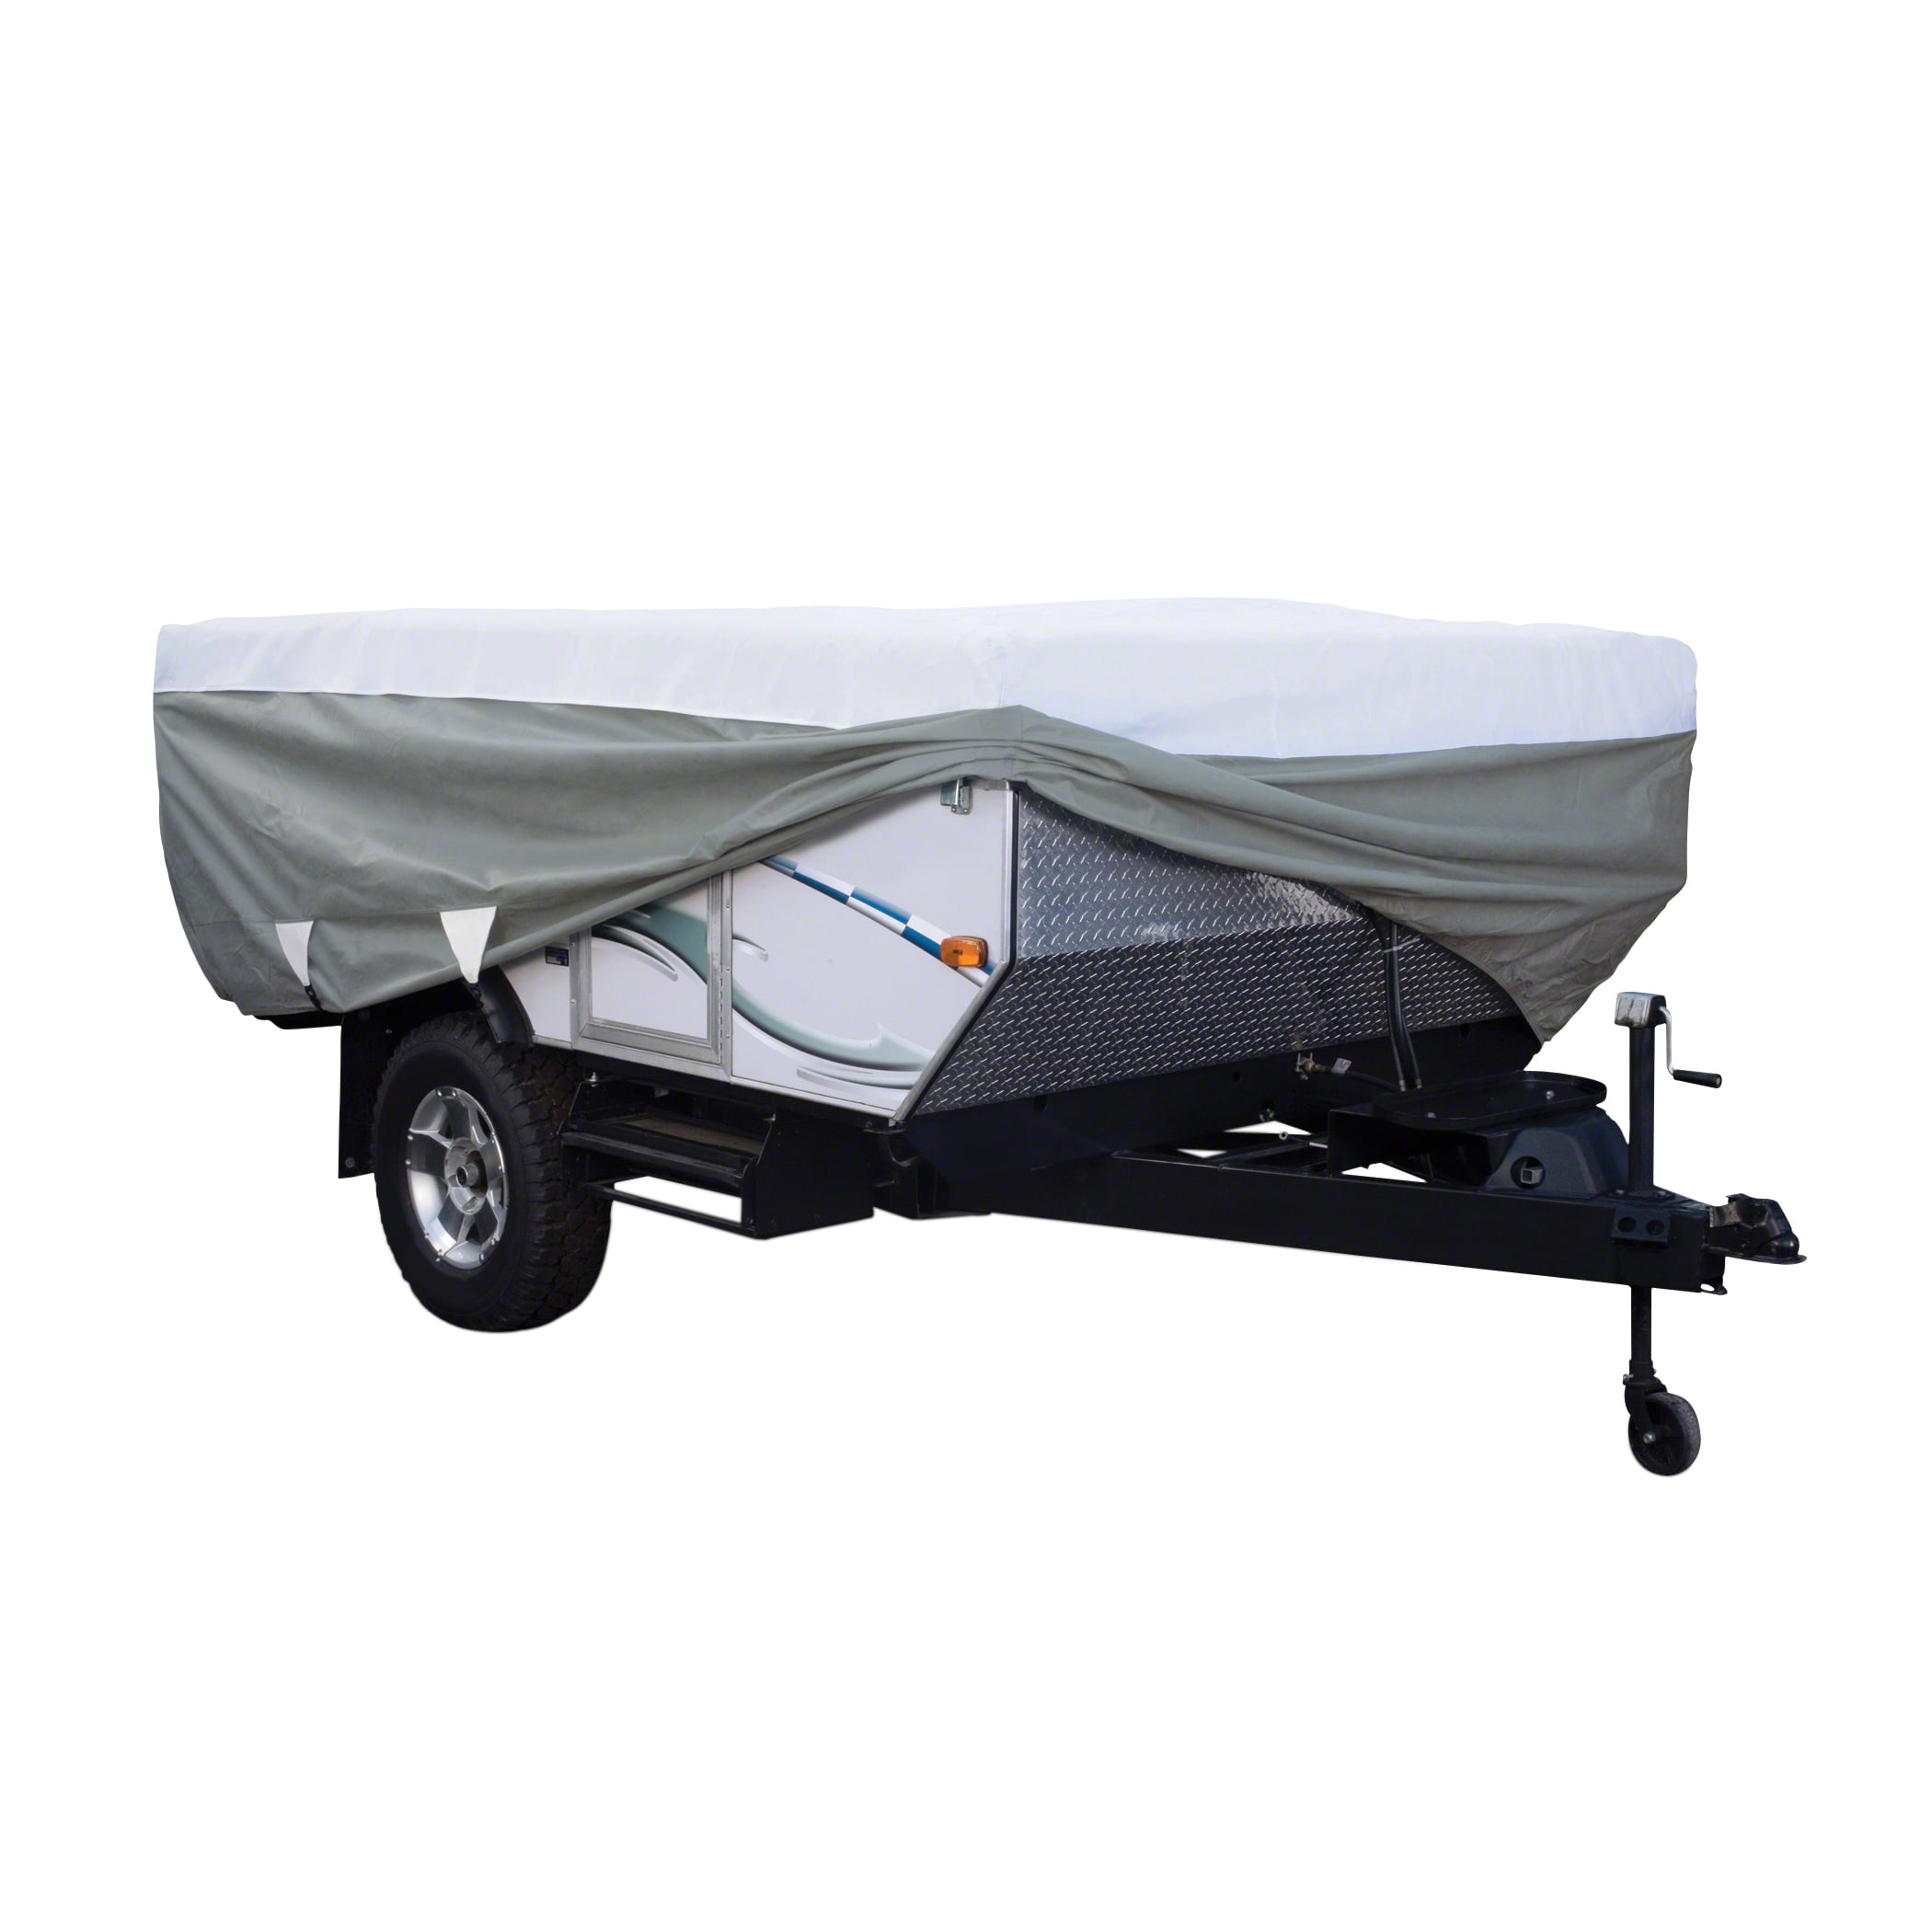 Picture of Classic Accessories 80-209-303101-00 PolyPro III Folding Camper Cover